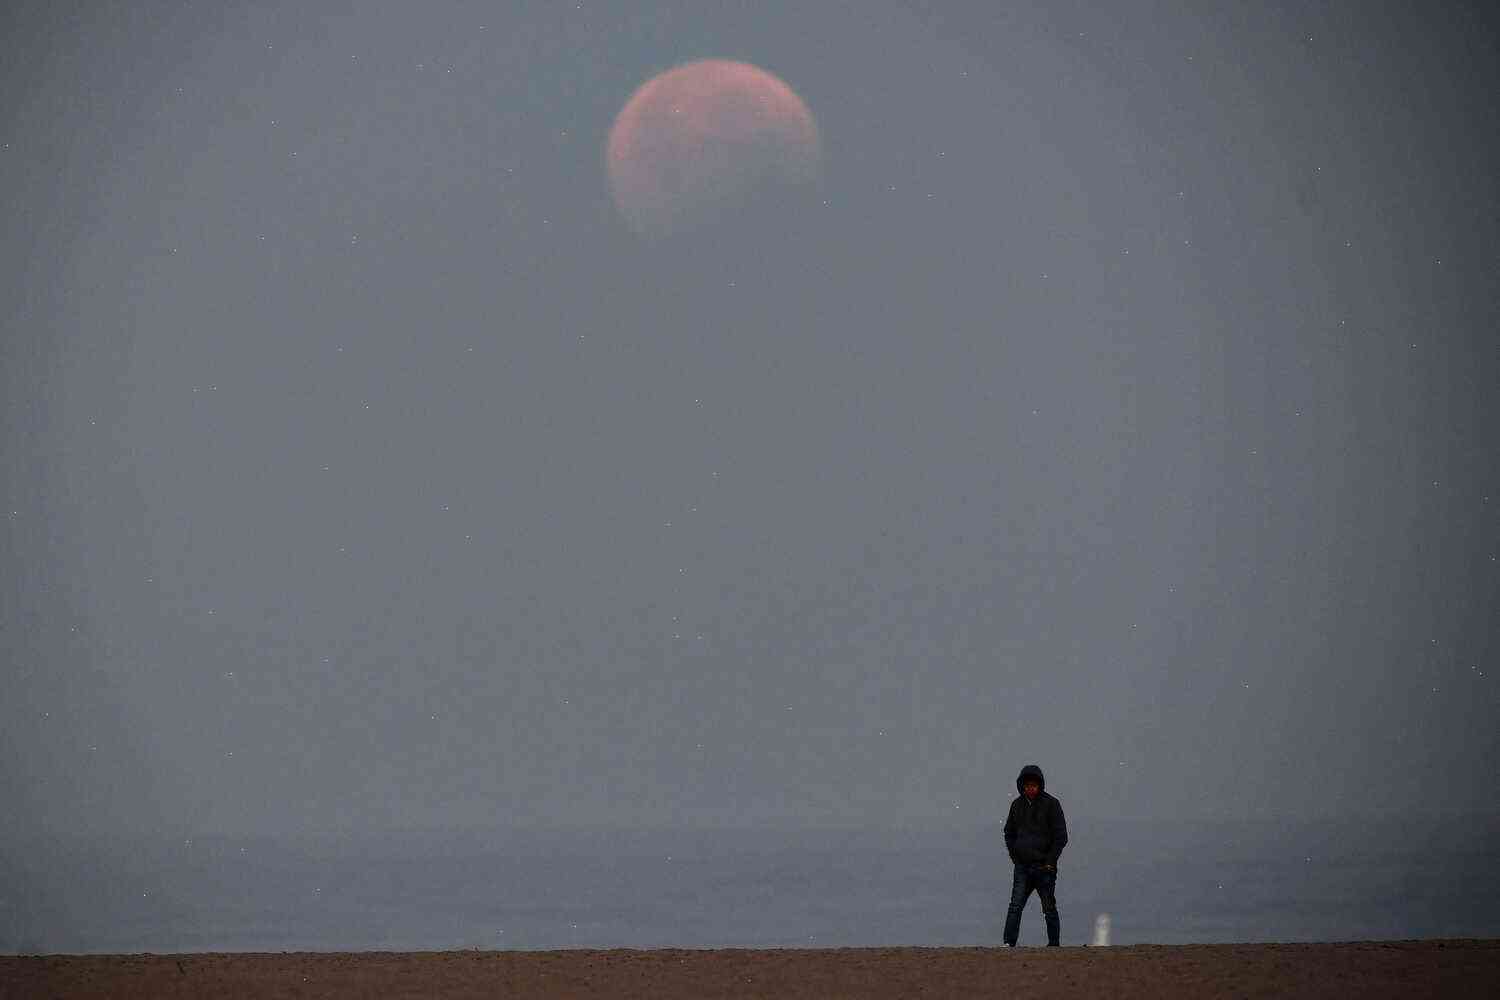 Dazzling 'blood moon' total lunar eclipse was the longest on record